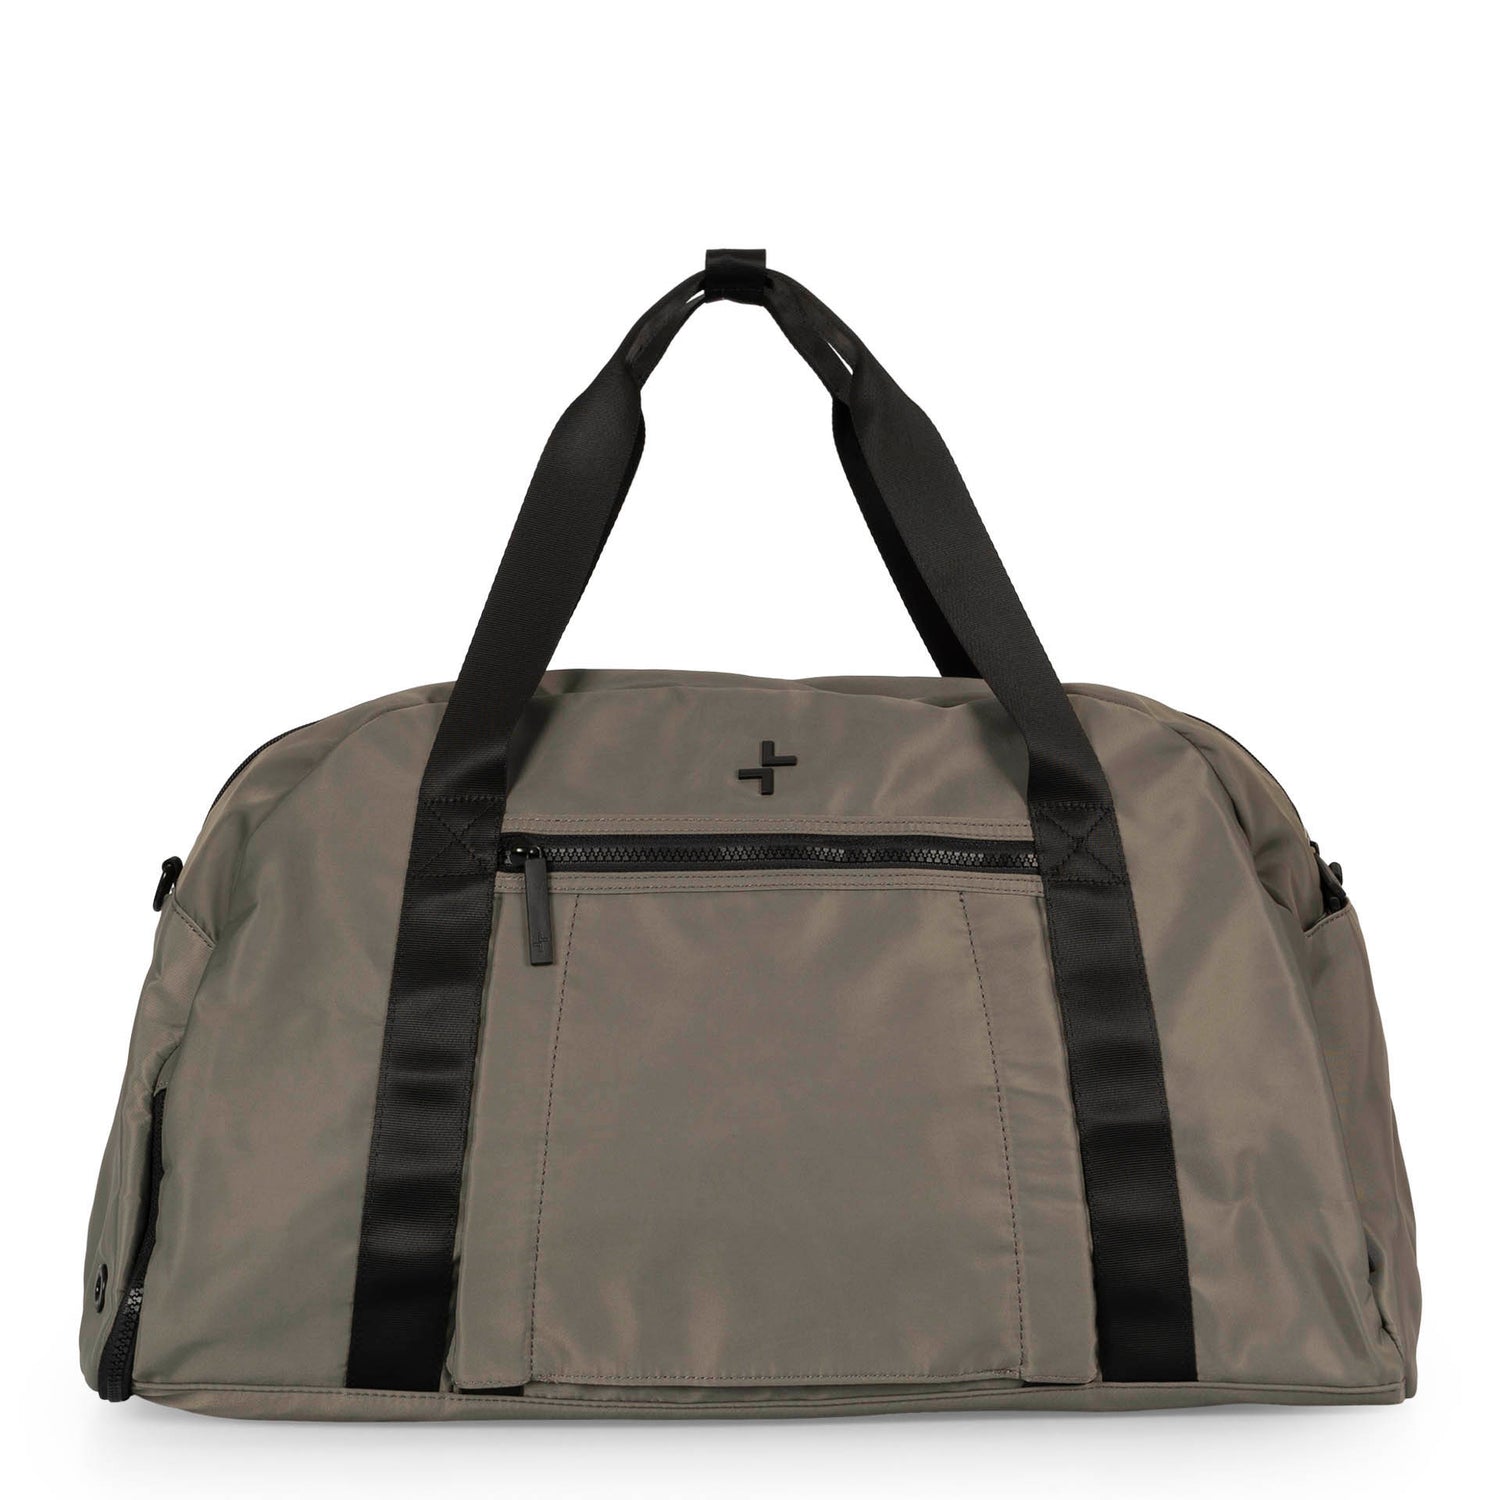 Front side of a grey-green duffle bag called Sutton designed by Tracker on a white background, showcasing its top handle, front zipper pocket and 2 side pockets.